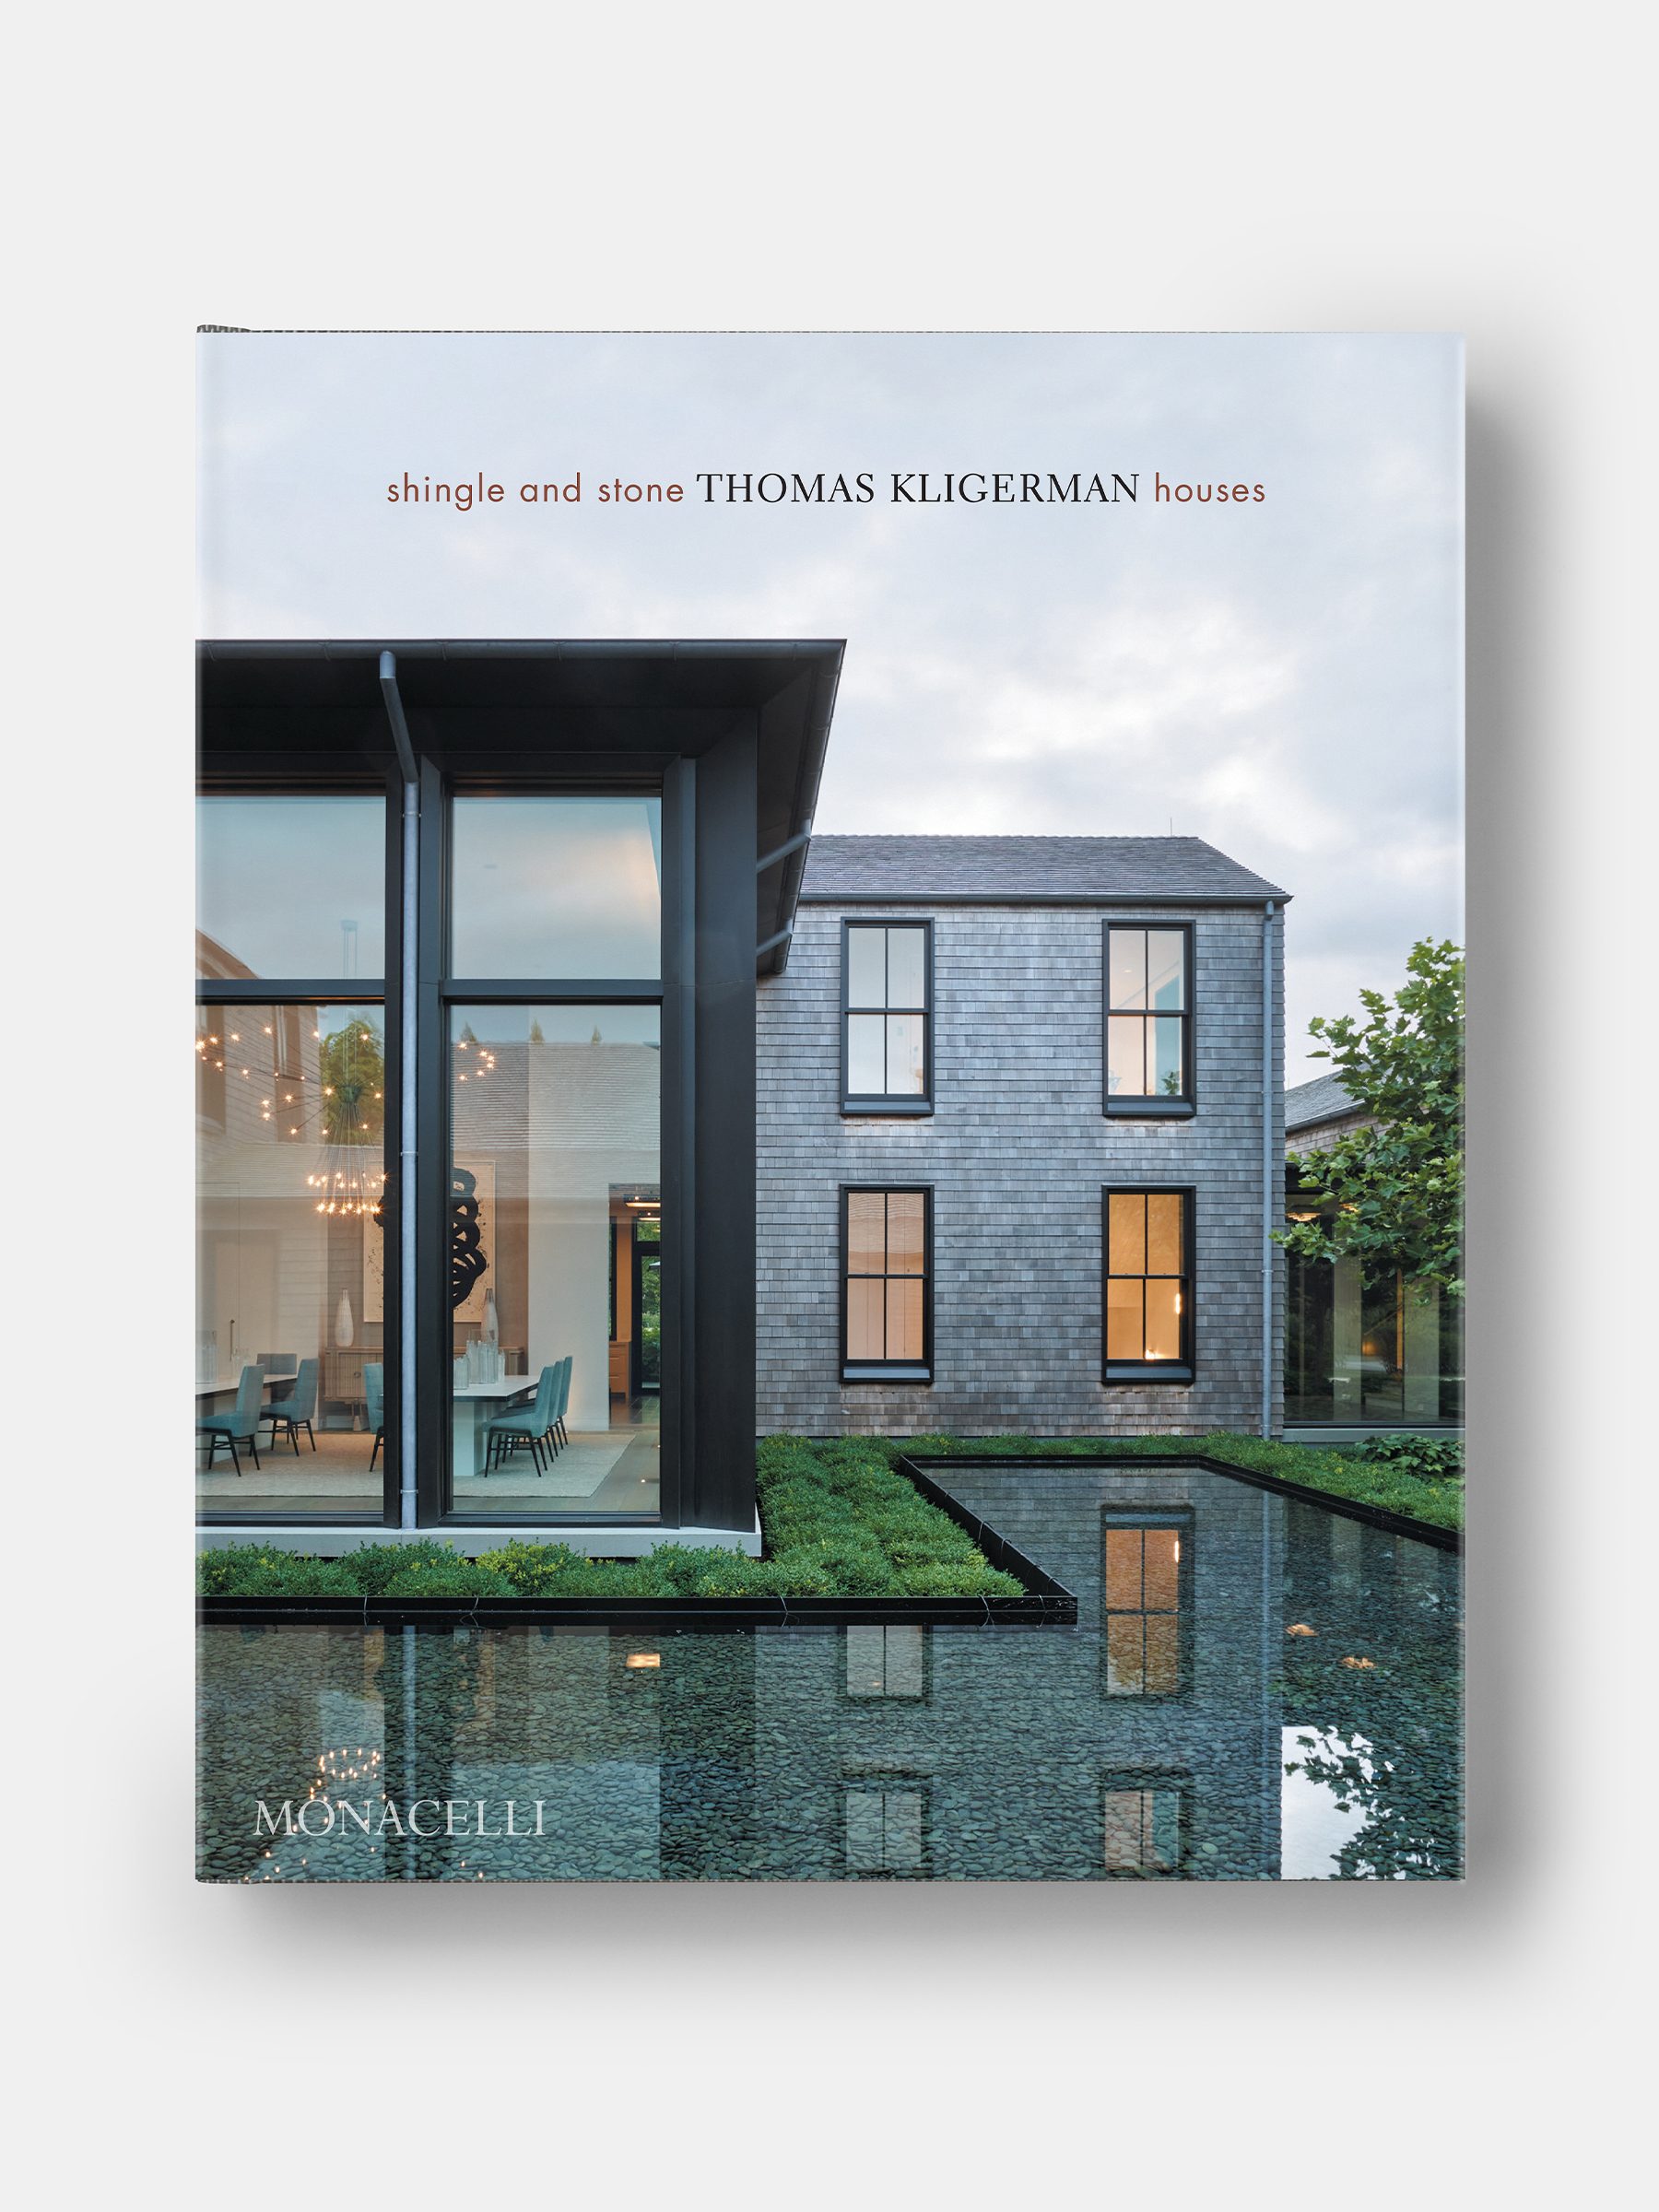 Cover of architect Thomas Kligerman's new book Shingle and Stone published by Phaidon imprint The Monacelli Press